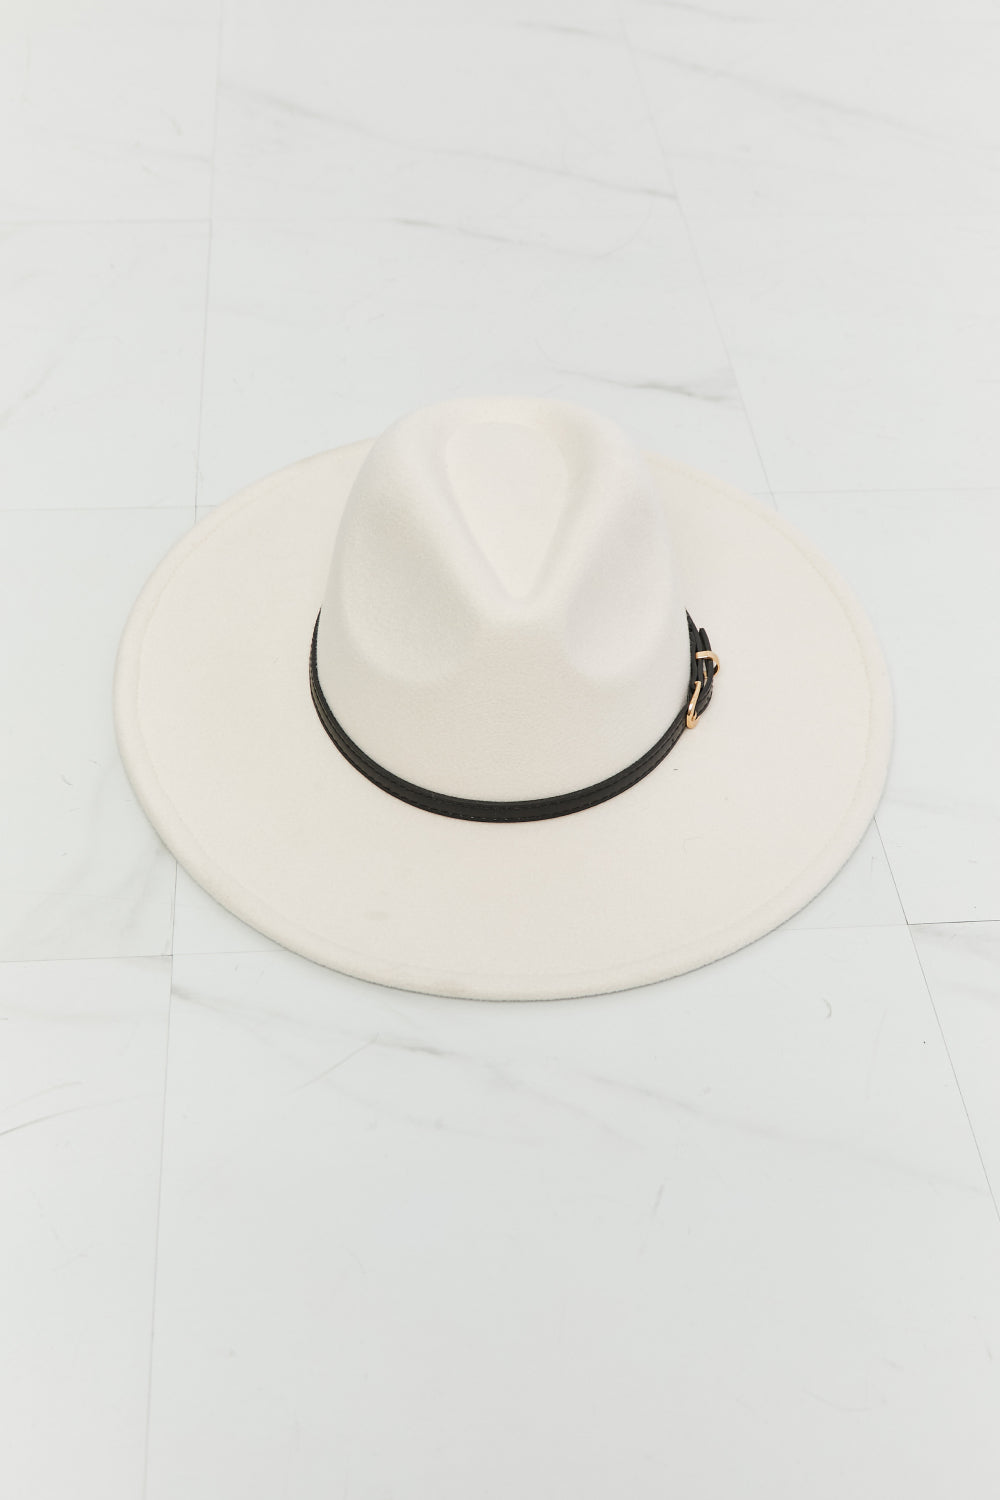 Fame Keep It Classy Fedora Hat Print on any thing USA/STOD clothes